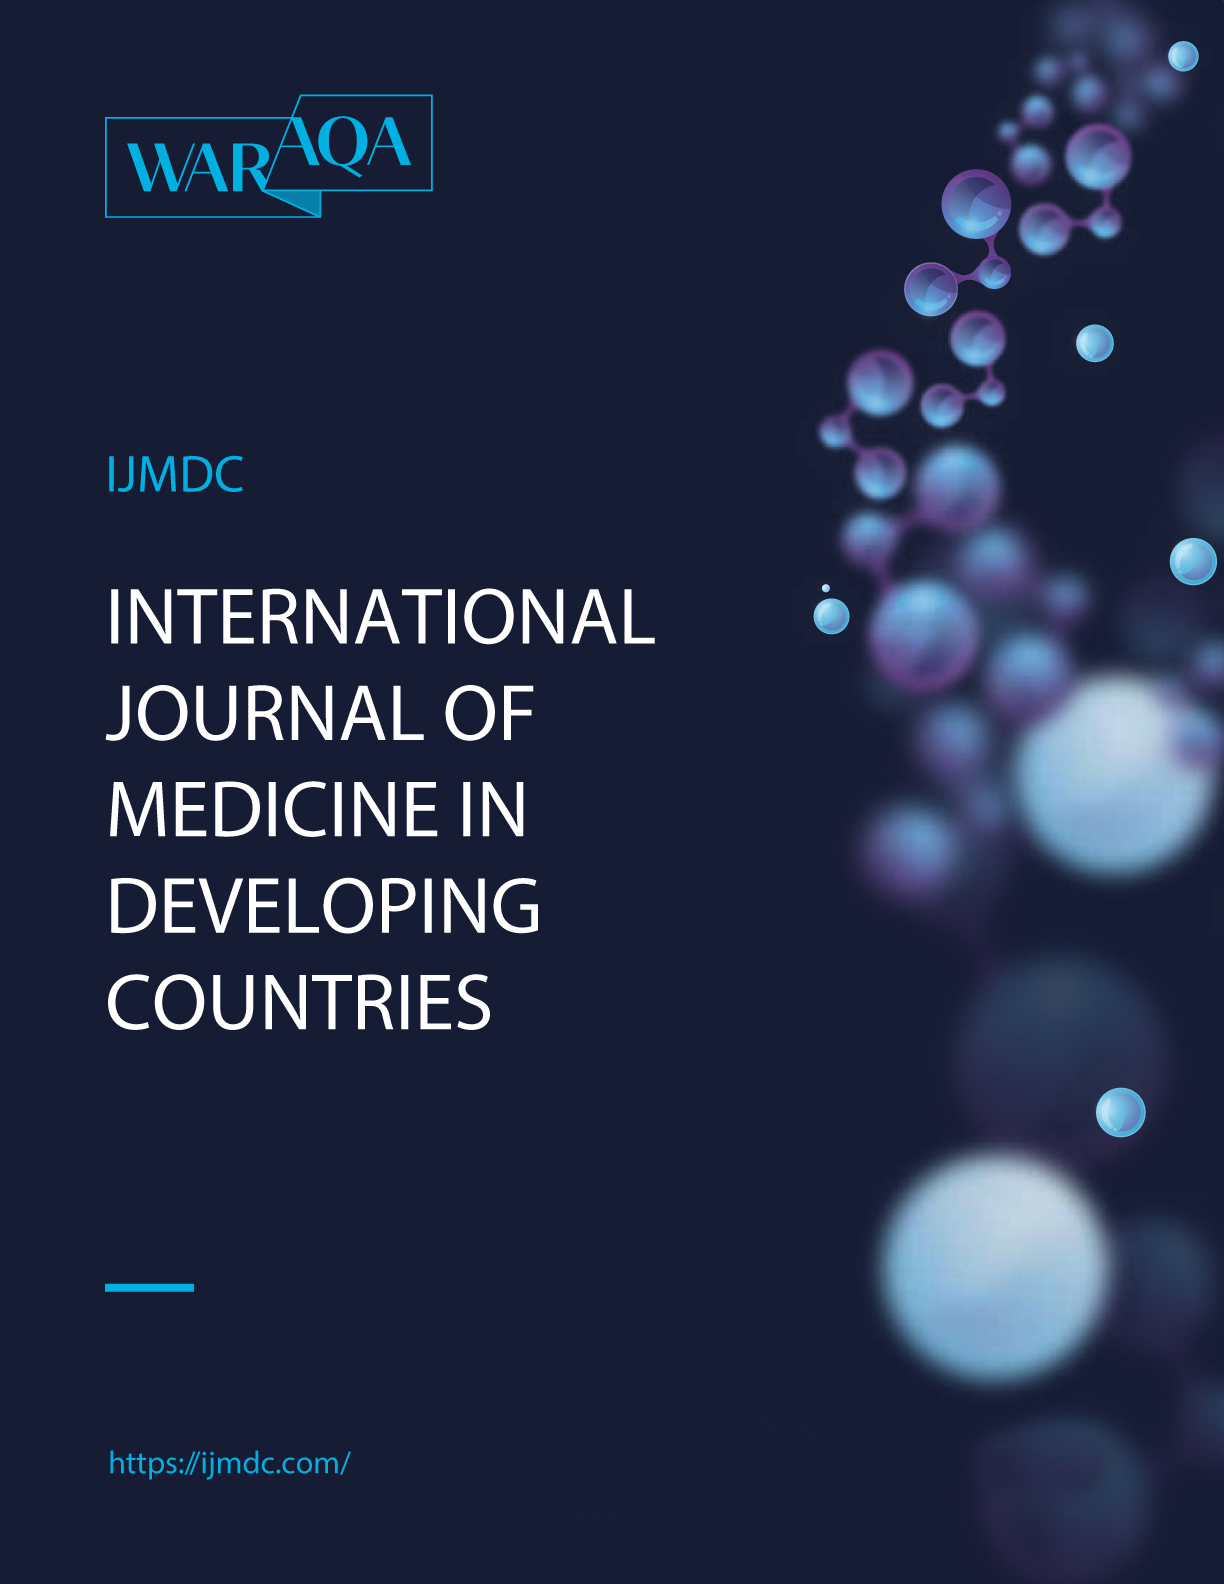 International Journal of Medicine in Developing Countries